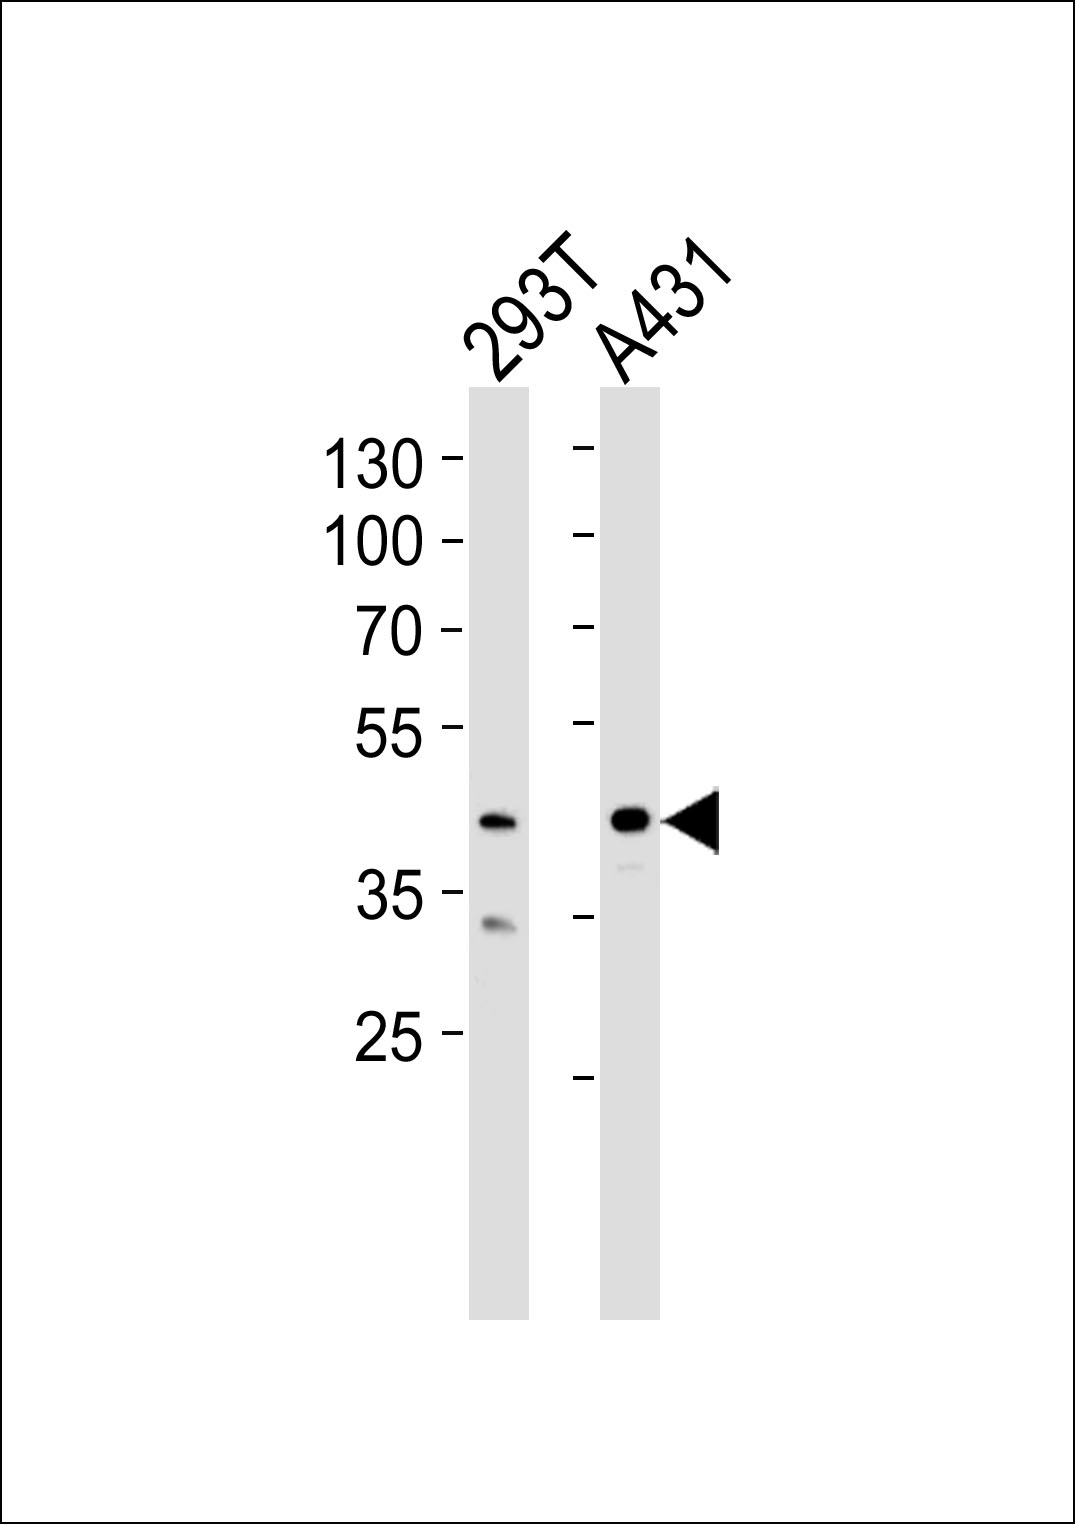 Western blot analysis of lysates from 293T, A431 cell line (from left to right), using CSNK2A1 Antibody (Center) (Cat.  #AP20578c).  AP20578c was diluted at 1:1000 at each lane.  A goat anti-rabbit IgG H&L(HRP) at 1:5000 dilution was used as the secondary antibody. Lysates at 35ug per lane.